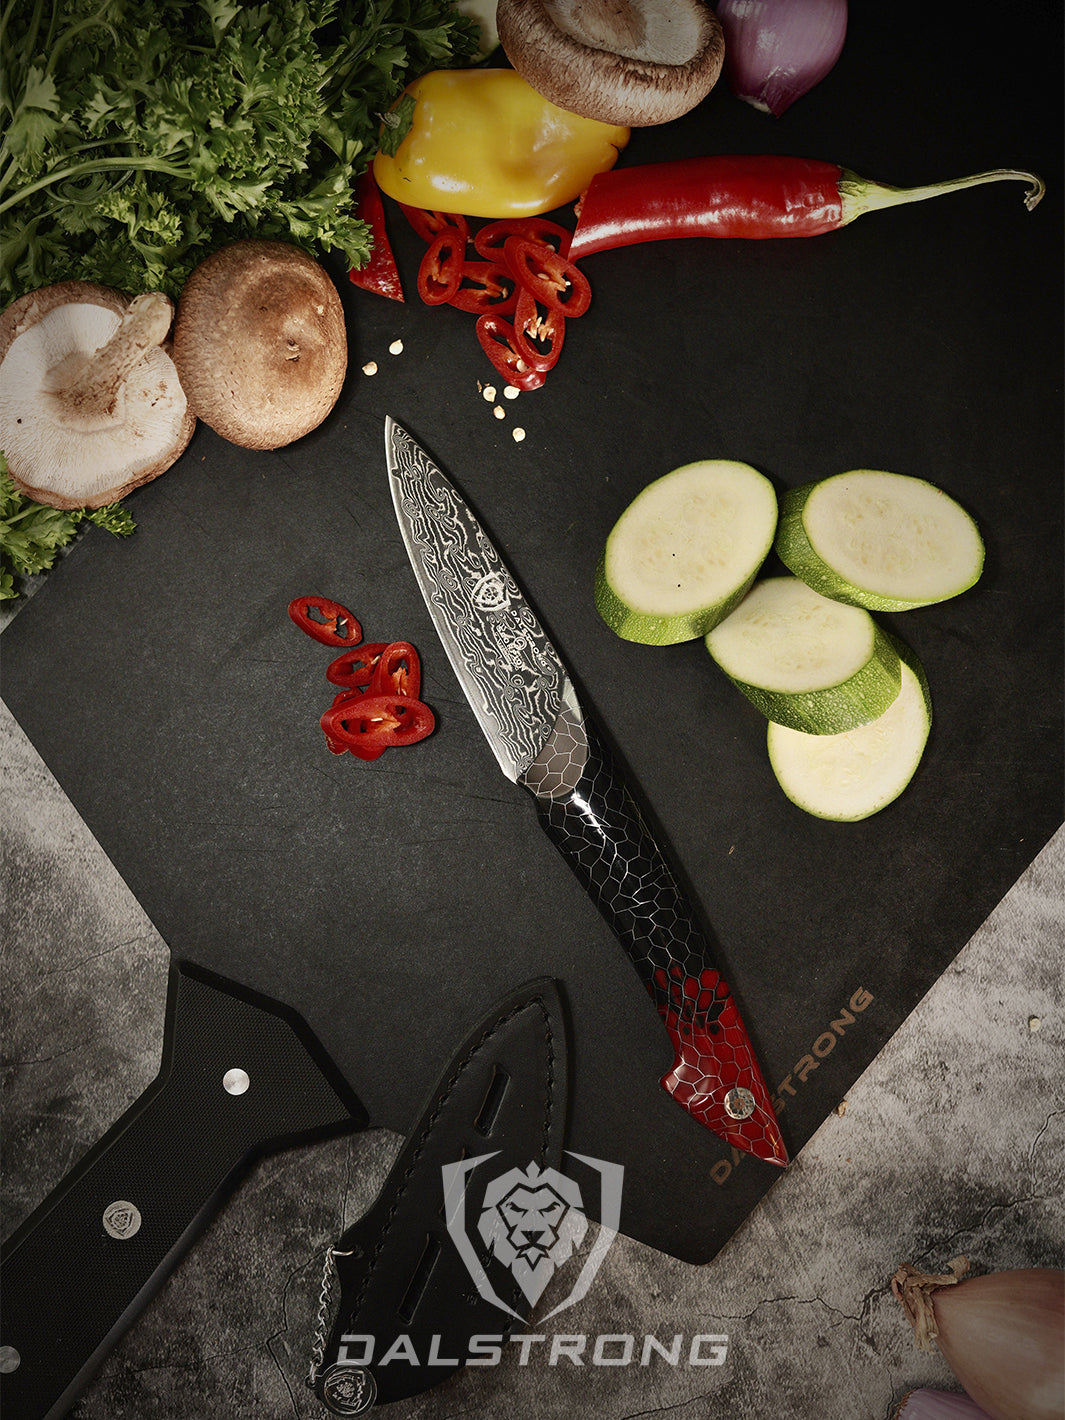 Dalstrong scorpion series 4 inch paring knife with red handle beside some mushrooms and chilli.